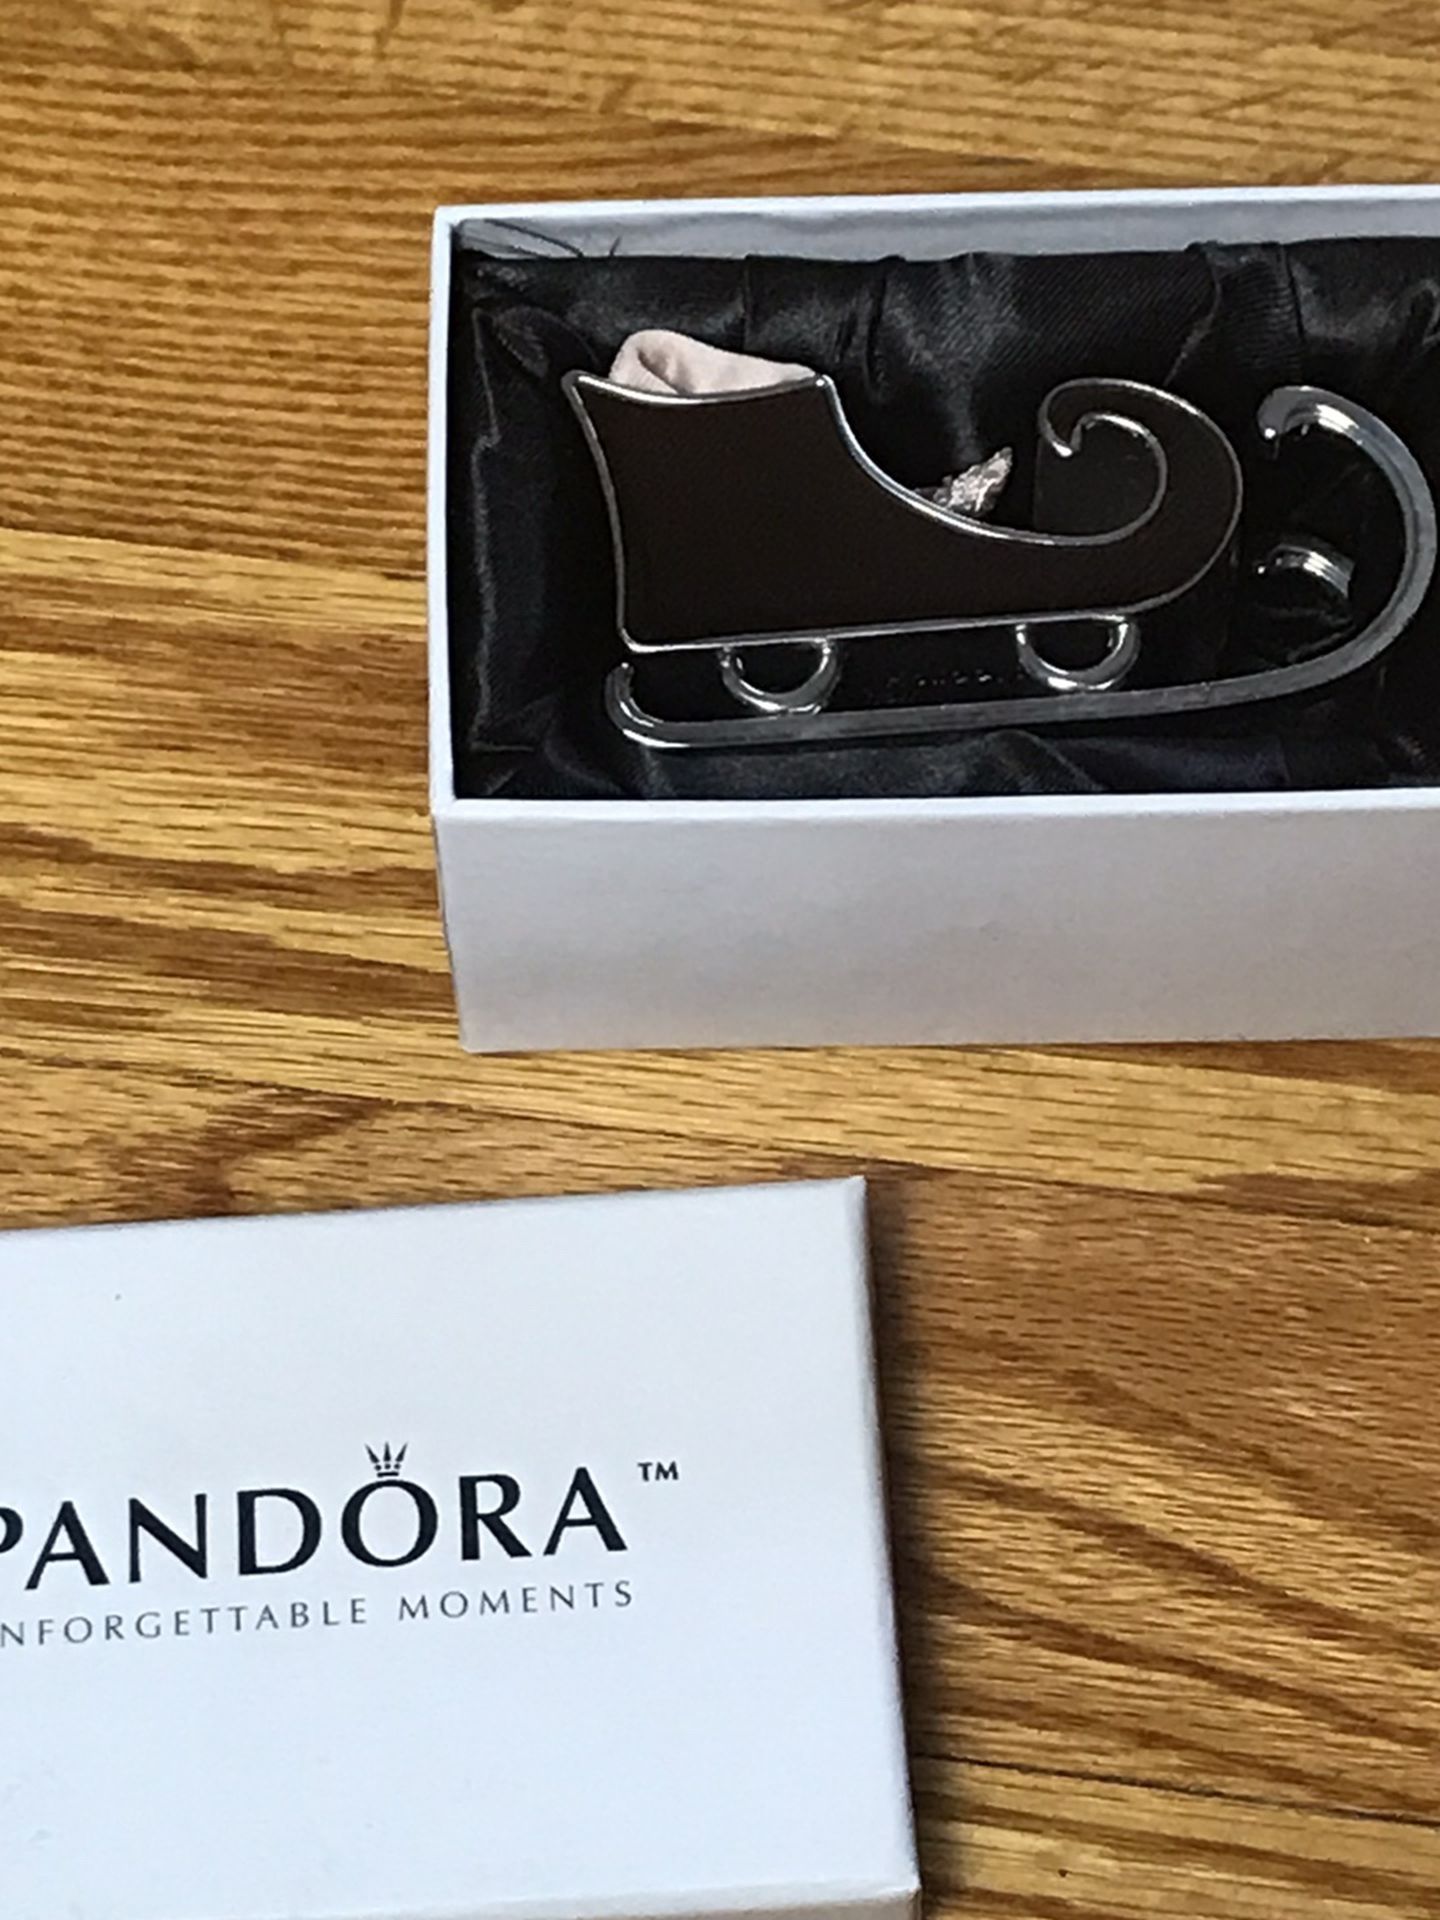 NIB PANDORA 2010 CHRISTMAS SLEIGH ORNAMENT AND POUCH OUTER BOX SET 3rd in series